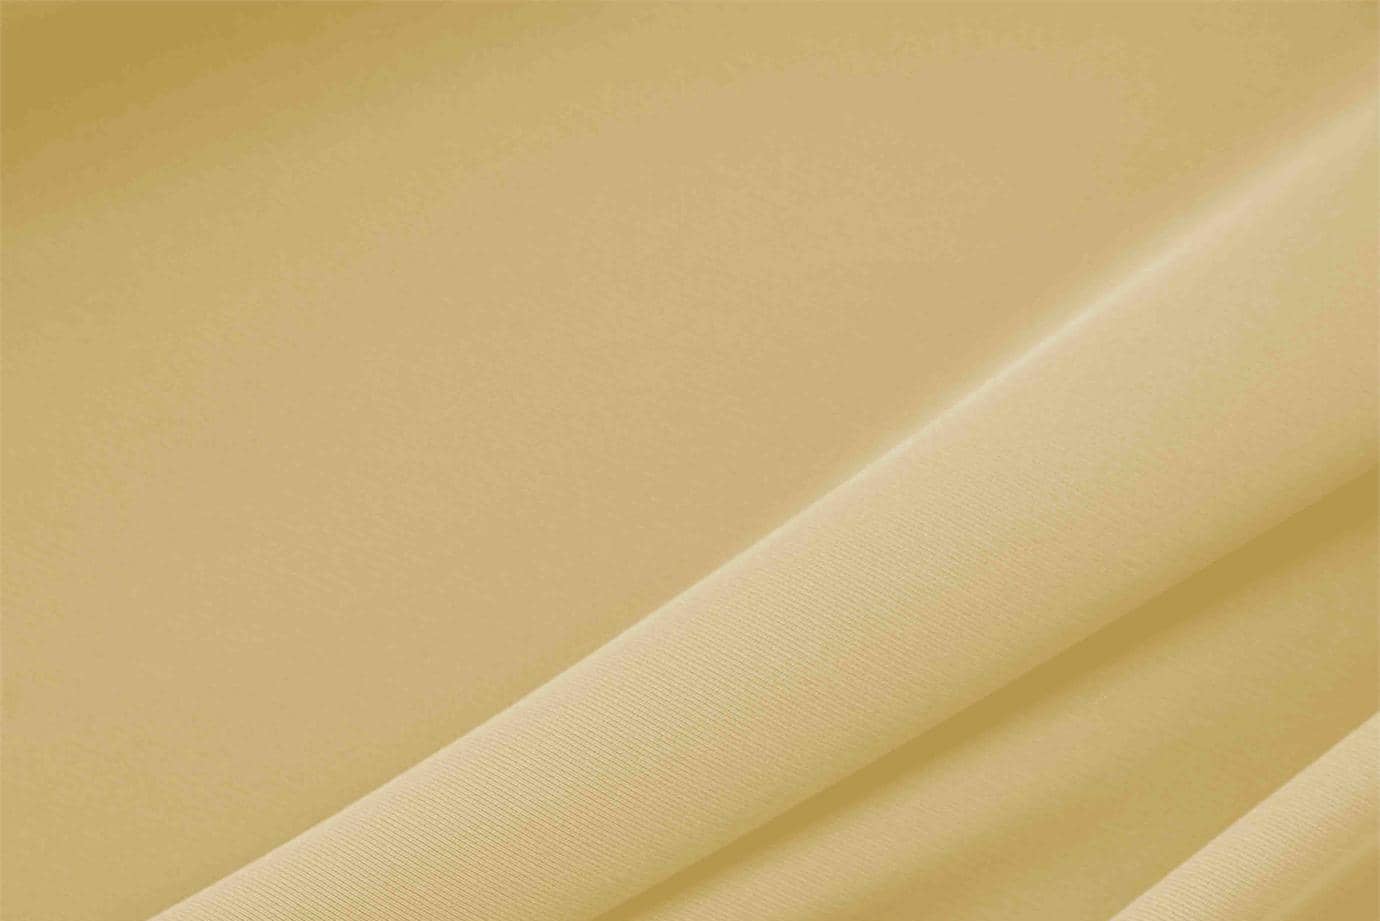 Beige heavy polyester microfibre fabric for dressmaking